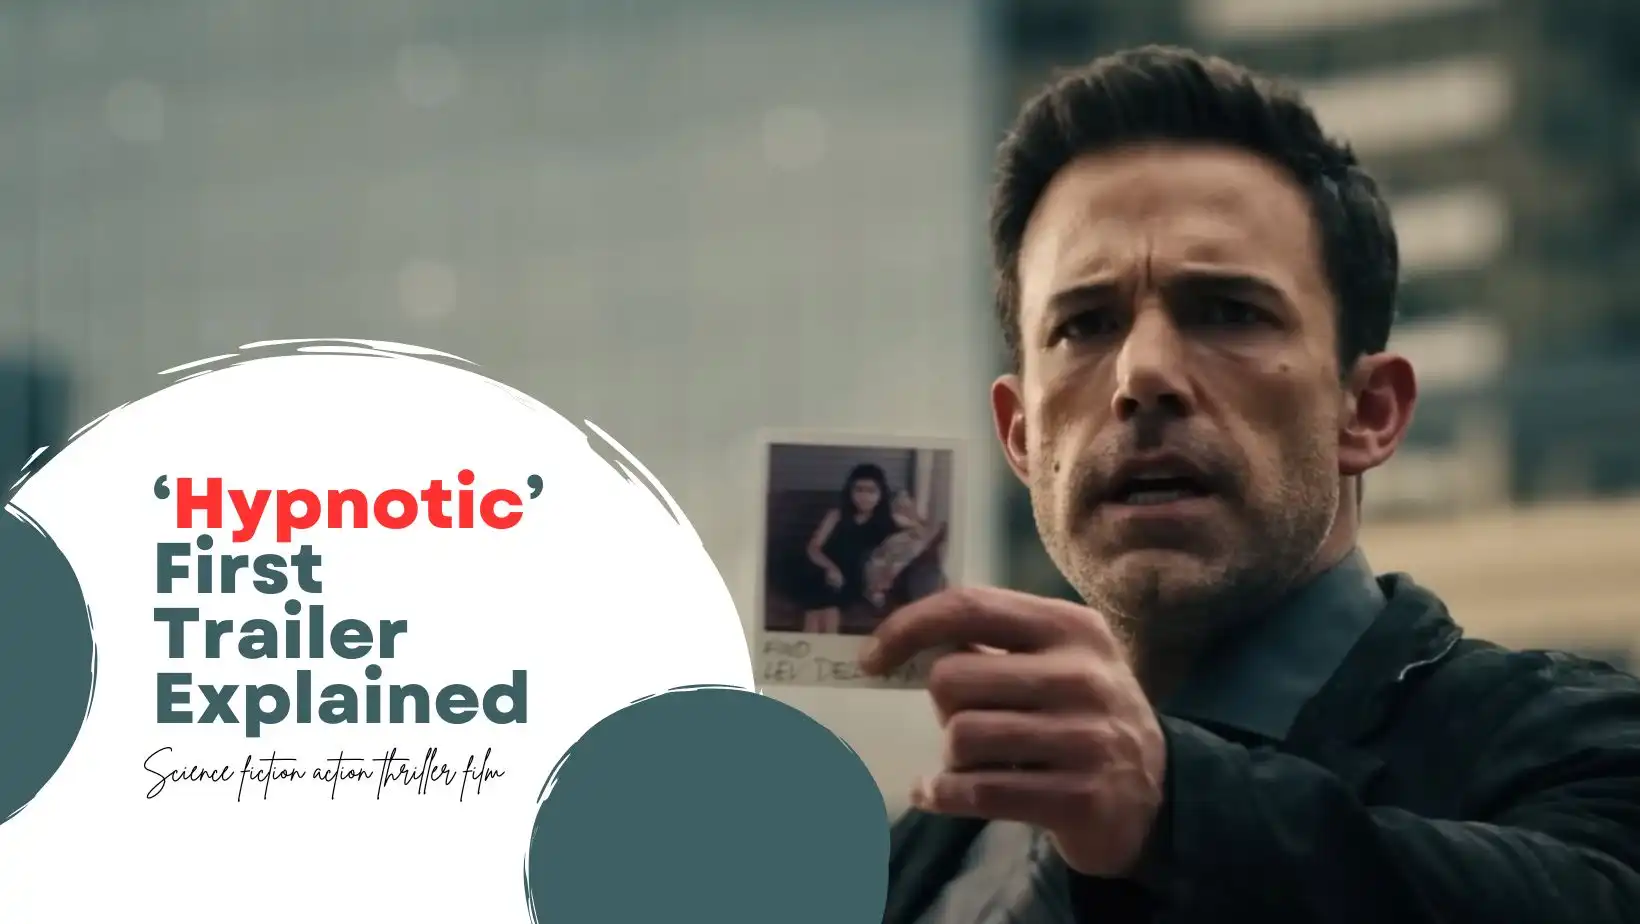 ‘Hypnotic’ First Trailer Explained